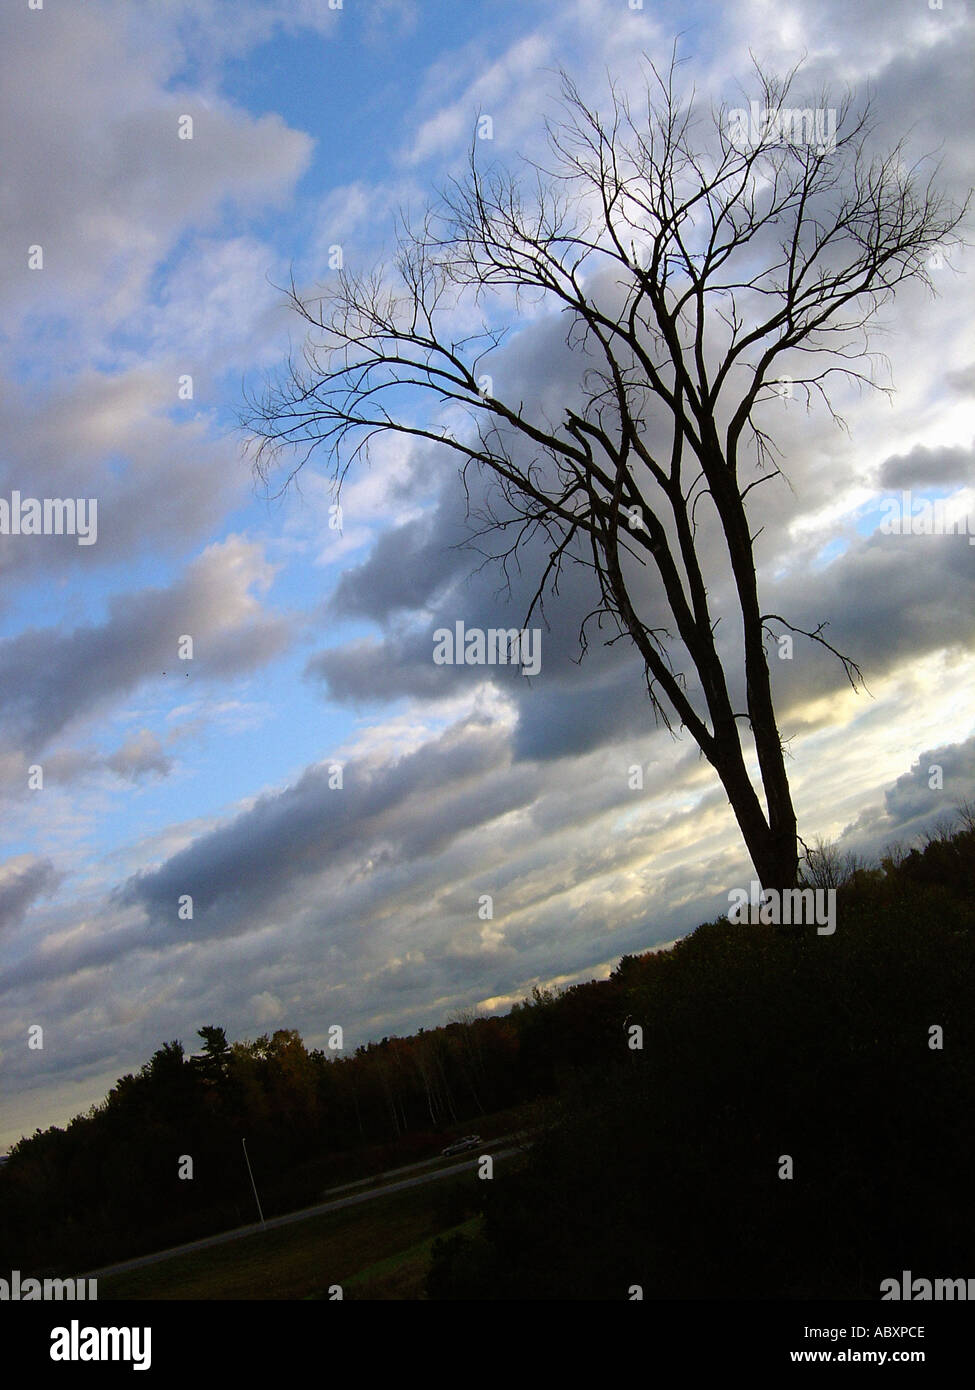 Rural Scene of a Single Bare Tree Silhouetted Against a Cloud Filled Late Afternoon Sky Copy Space Stock Photo